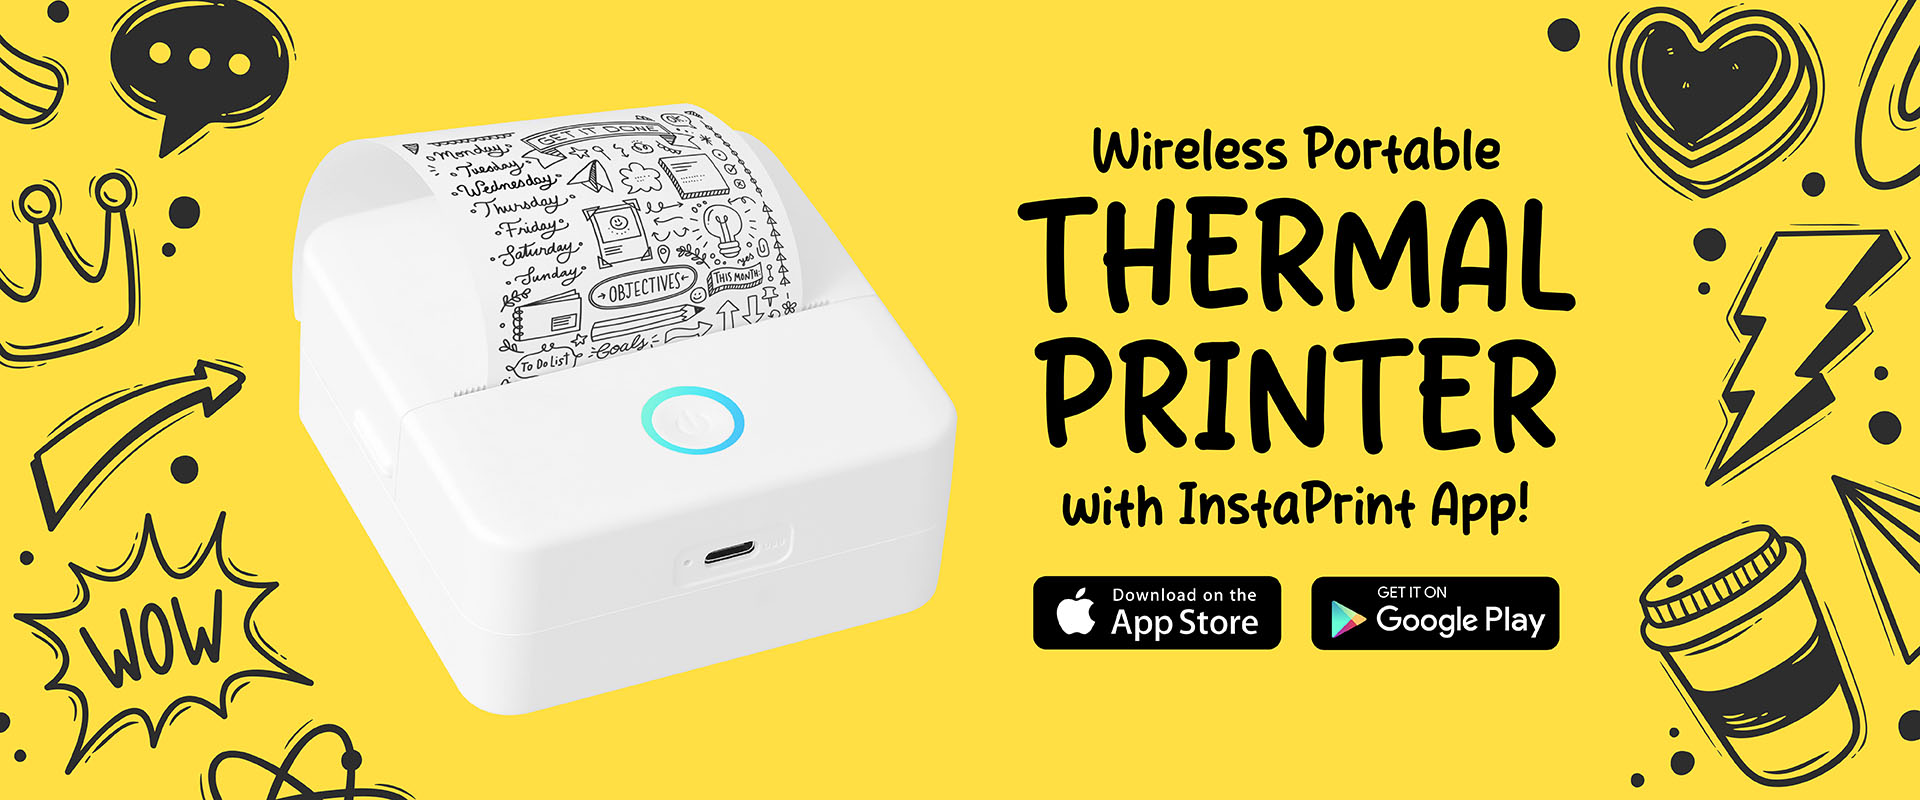 Featured Item 4: Wireless Portable Thermal Printer